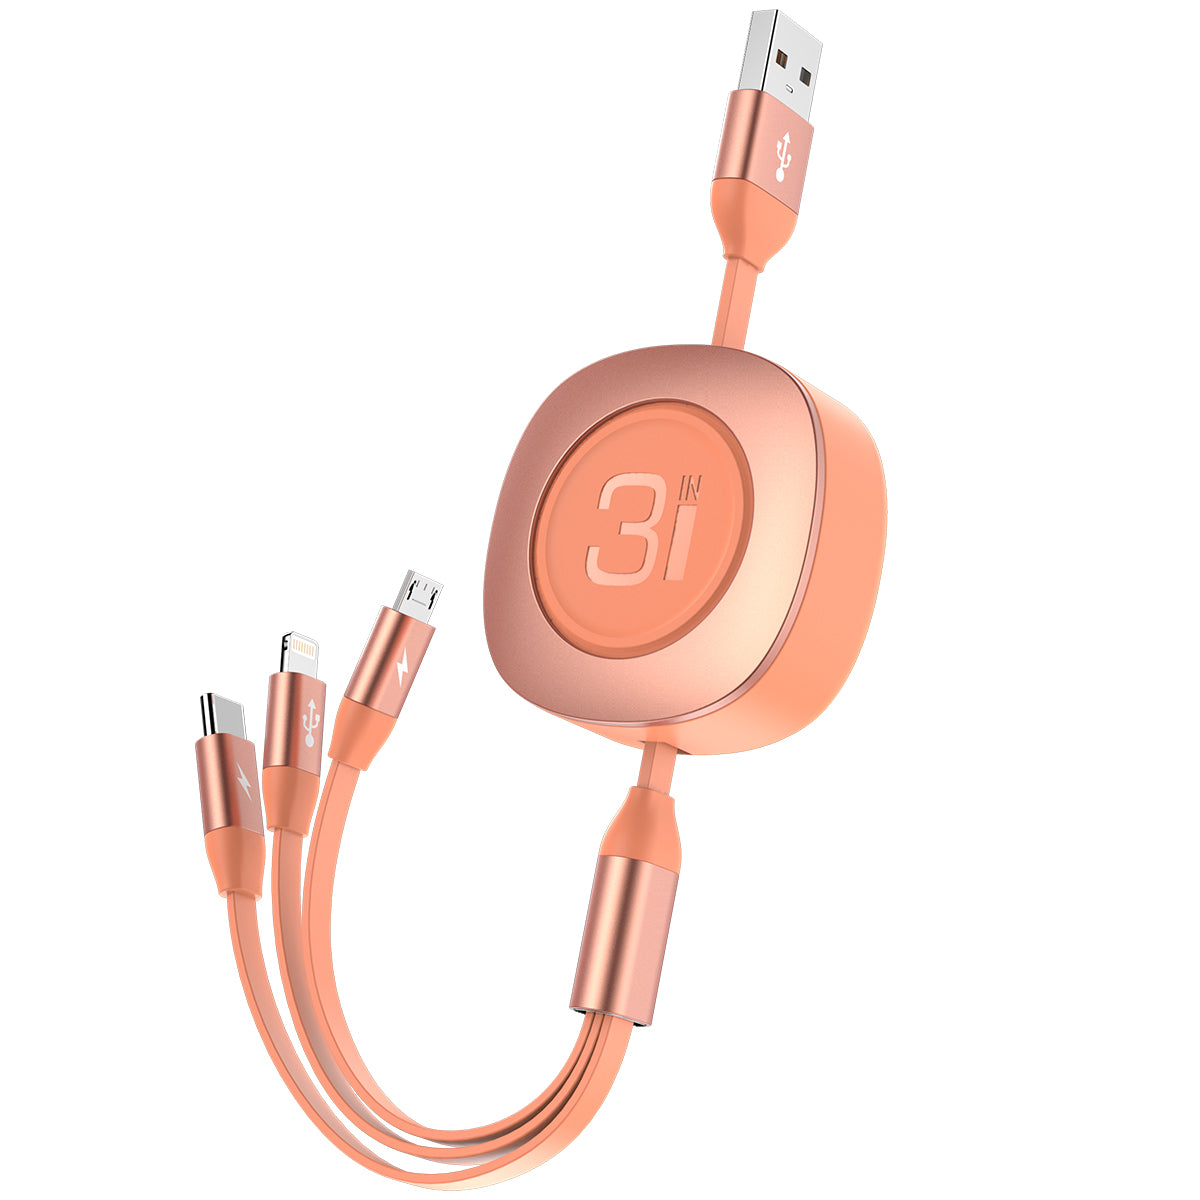 ROCK Retractable 3 in 1 Charge Cable For iPhone Samsung Huawei Xiaomi Adjustable Micro USB Type C Portable Phone Data Cable